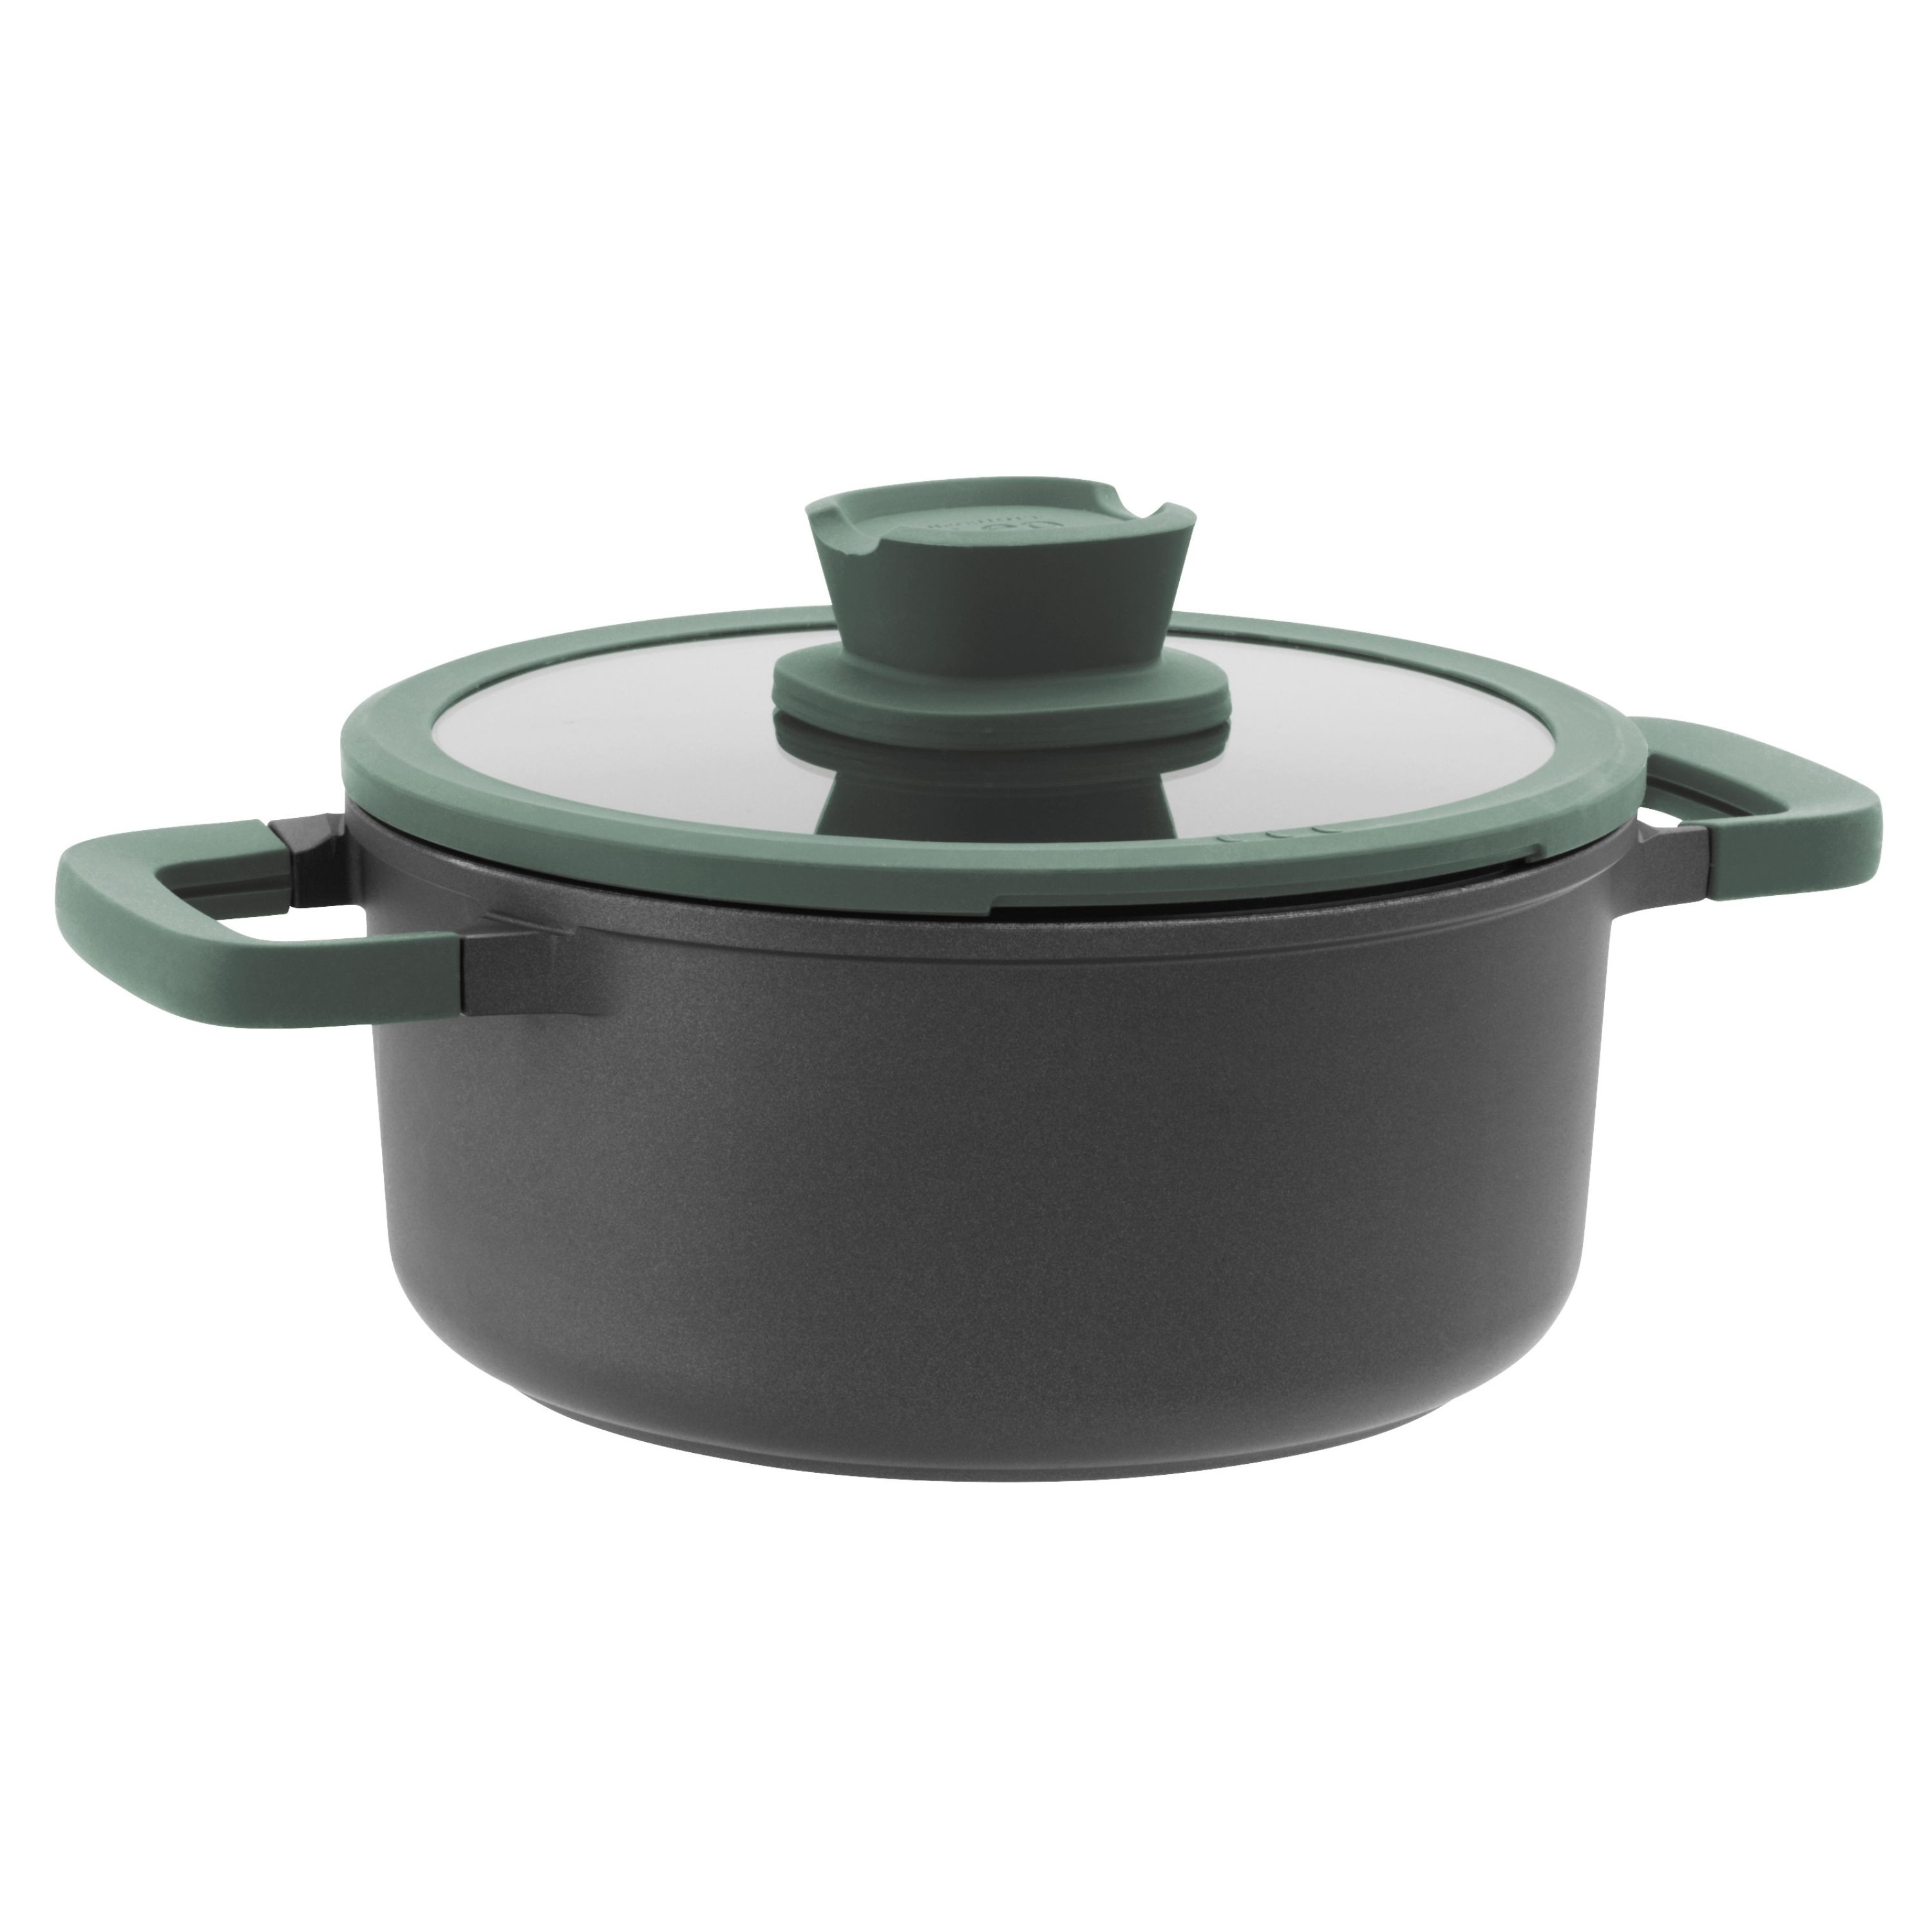 https://ak1.ostkcdn.com/images/products/is/images/direct/8a430e4cd0360648d3794dad1e8aed0427be4f56/BergHOFF-Forest-Non-stick-Cast-Aluminum-Stockpot-8%22%2C-2.9qt.-With-Glass-Lid.jpg